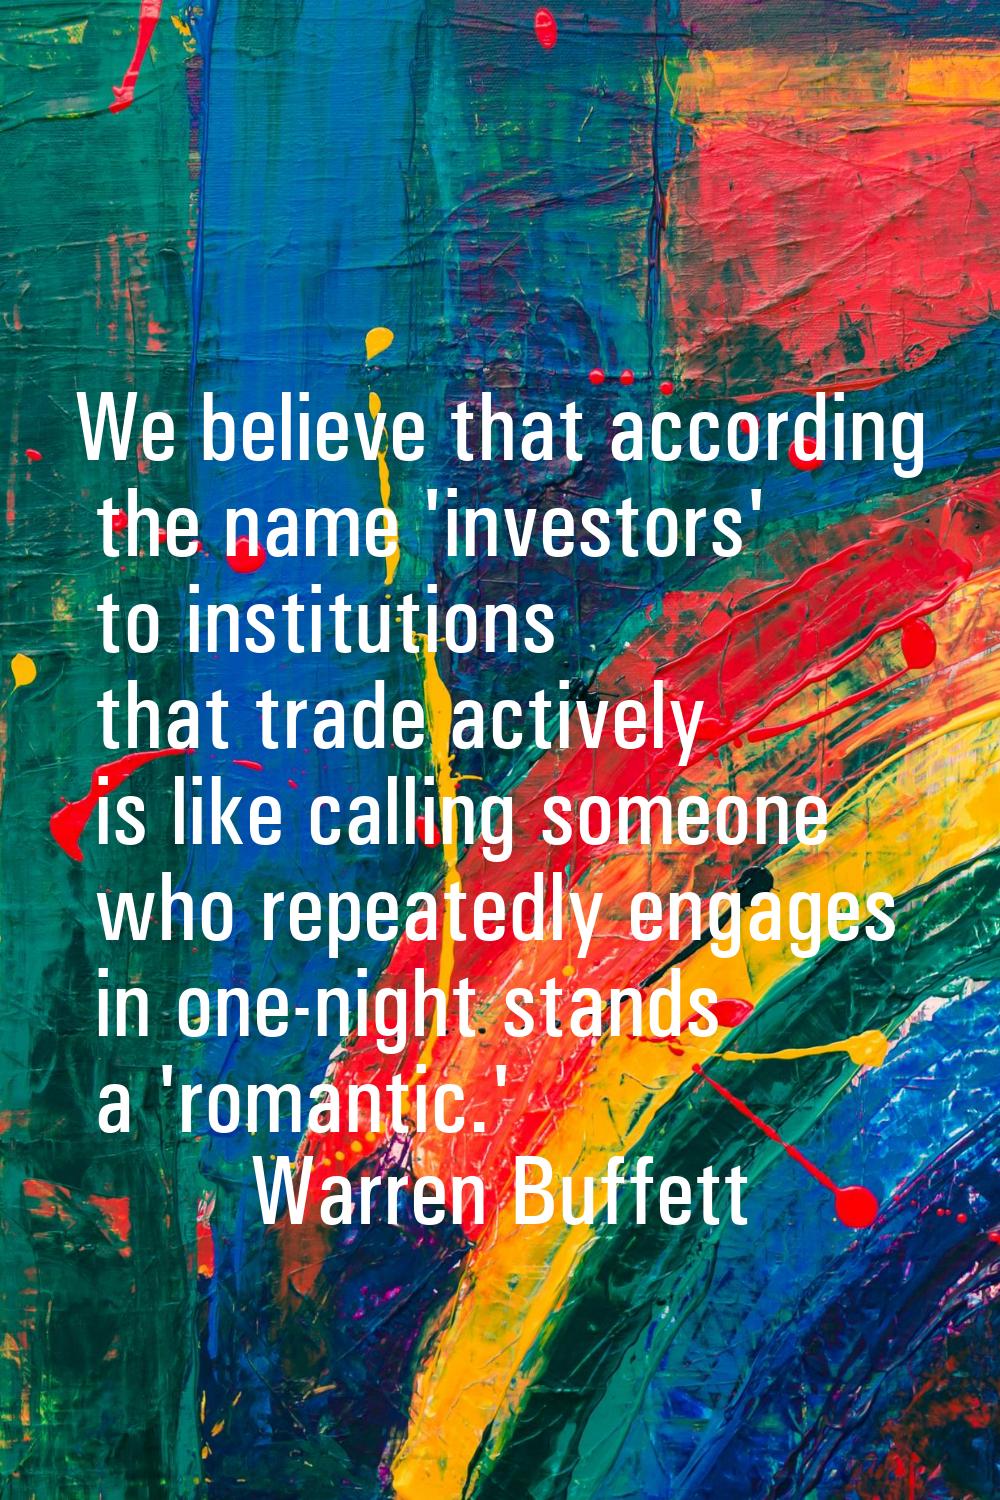 We believe that according the name 'investors' to institutions that trade actively is like calling 